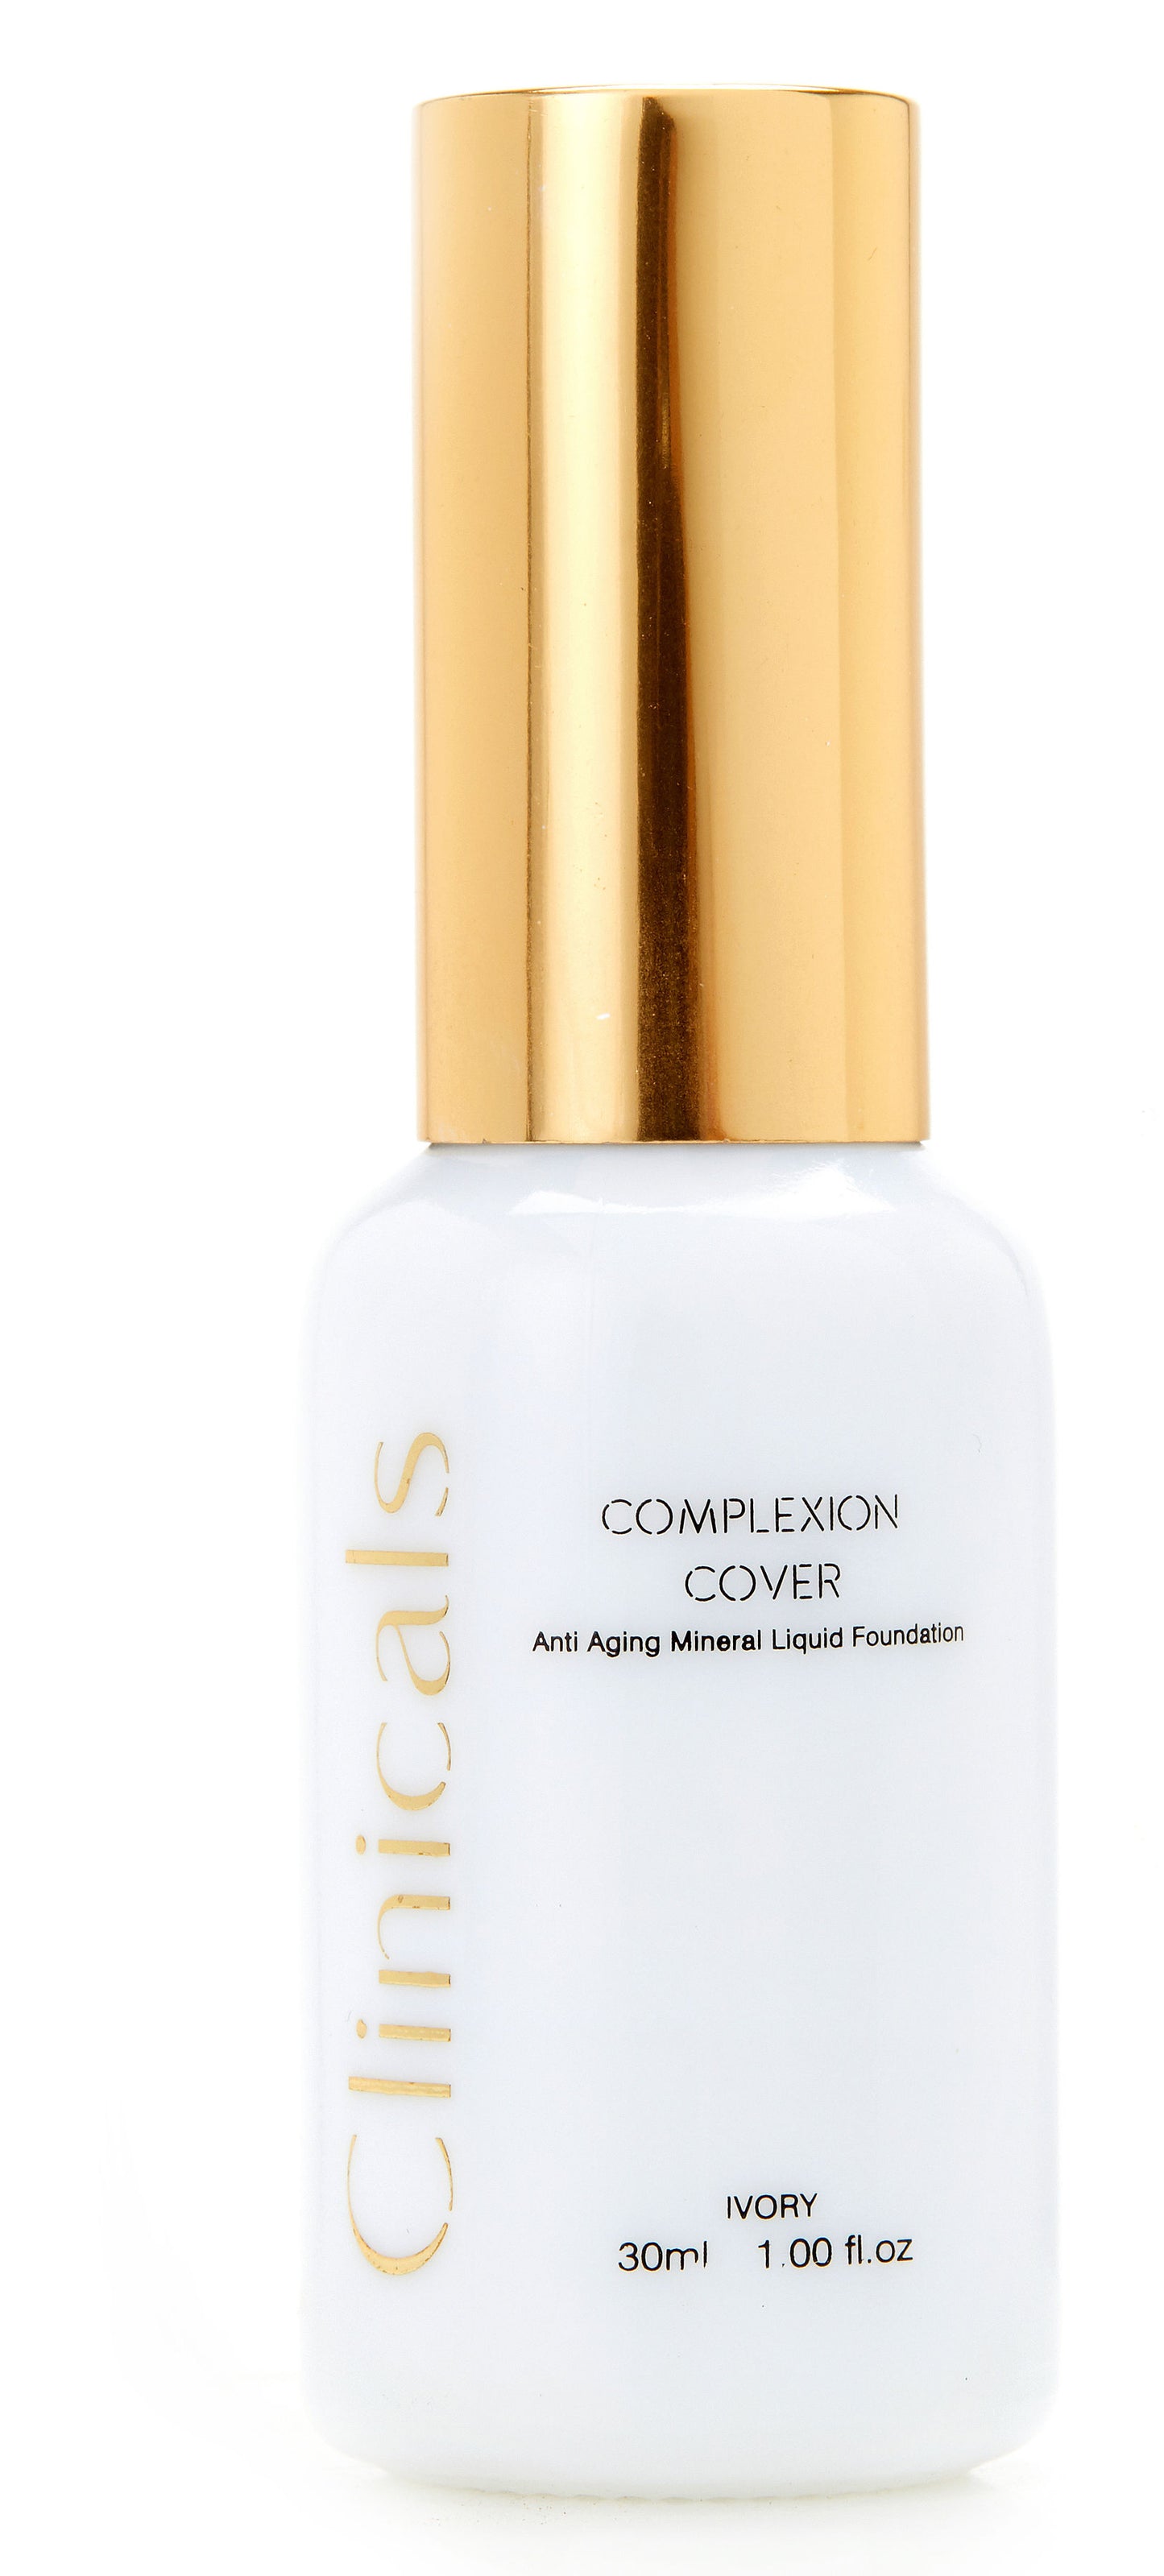 Complexion Cover Ivory